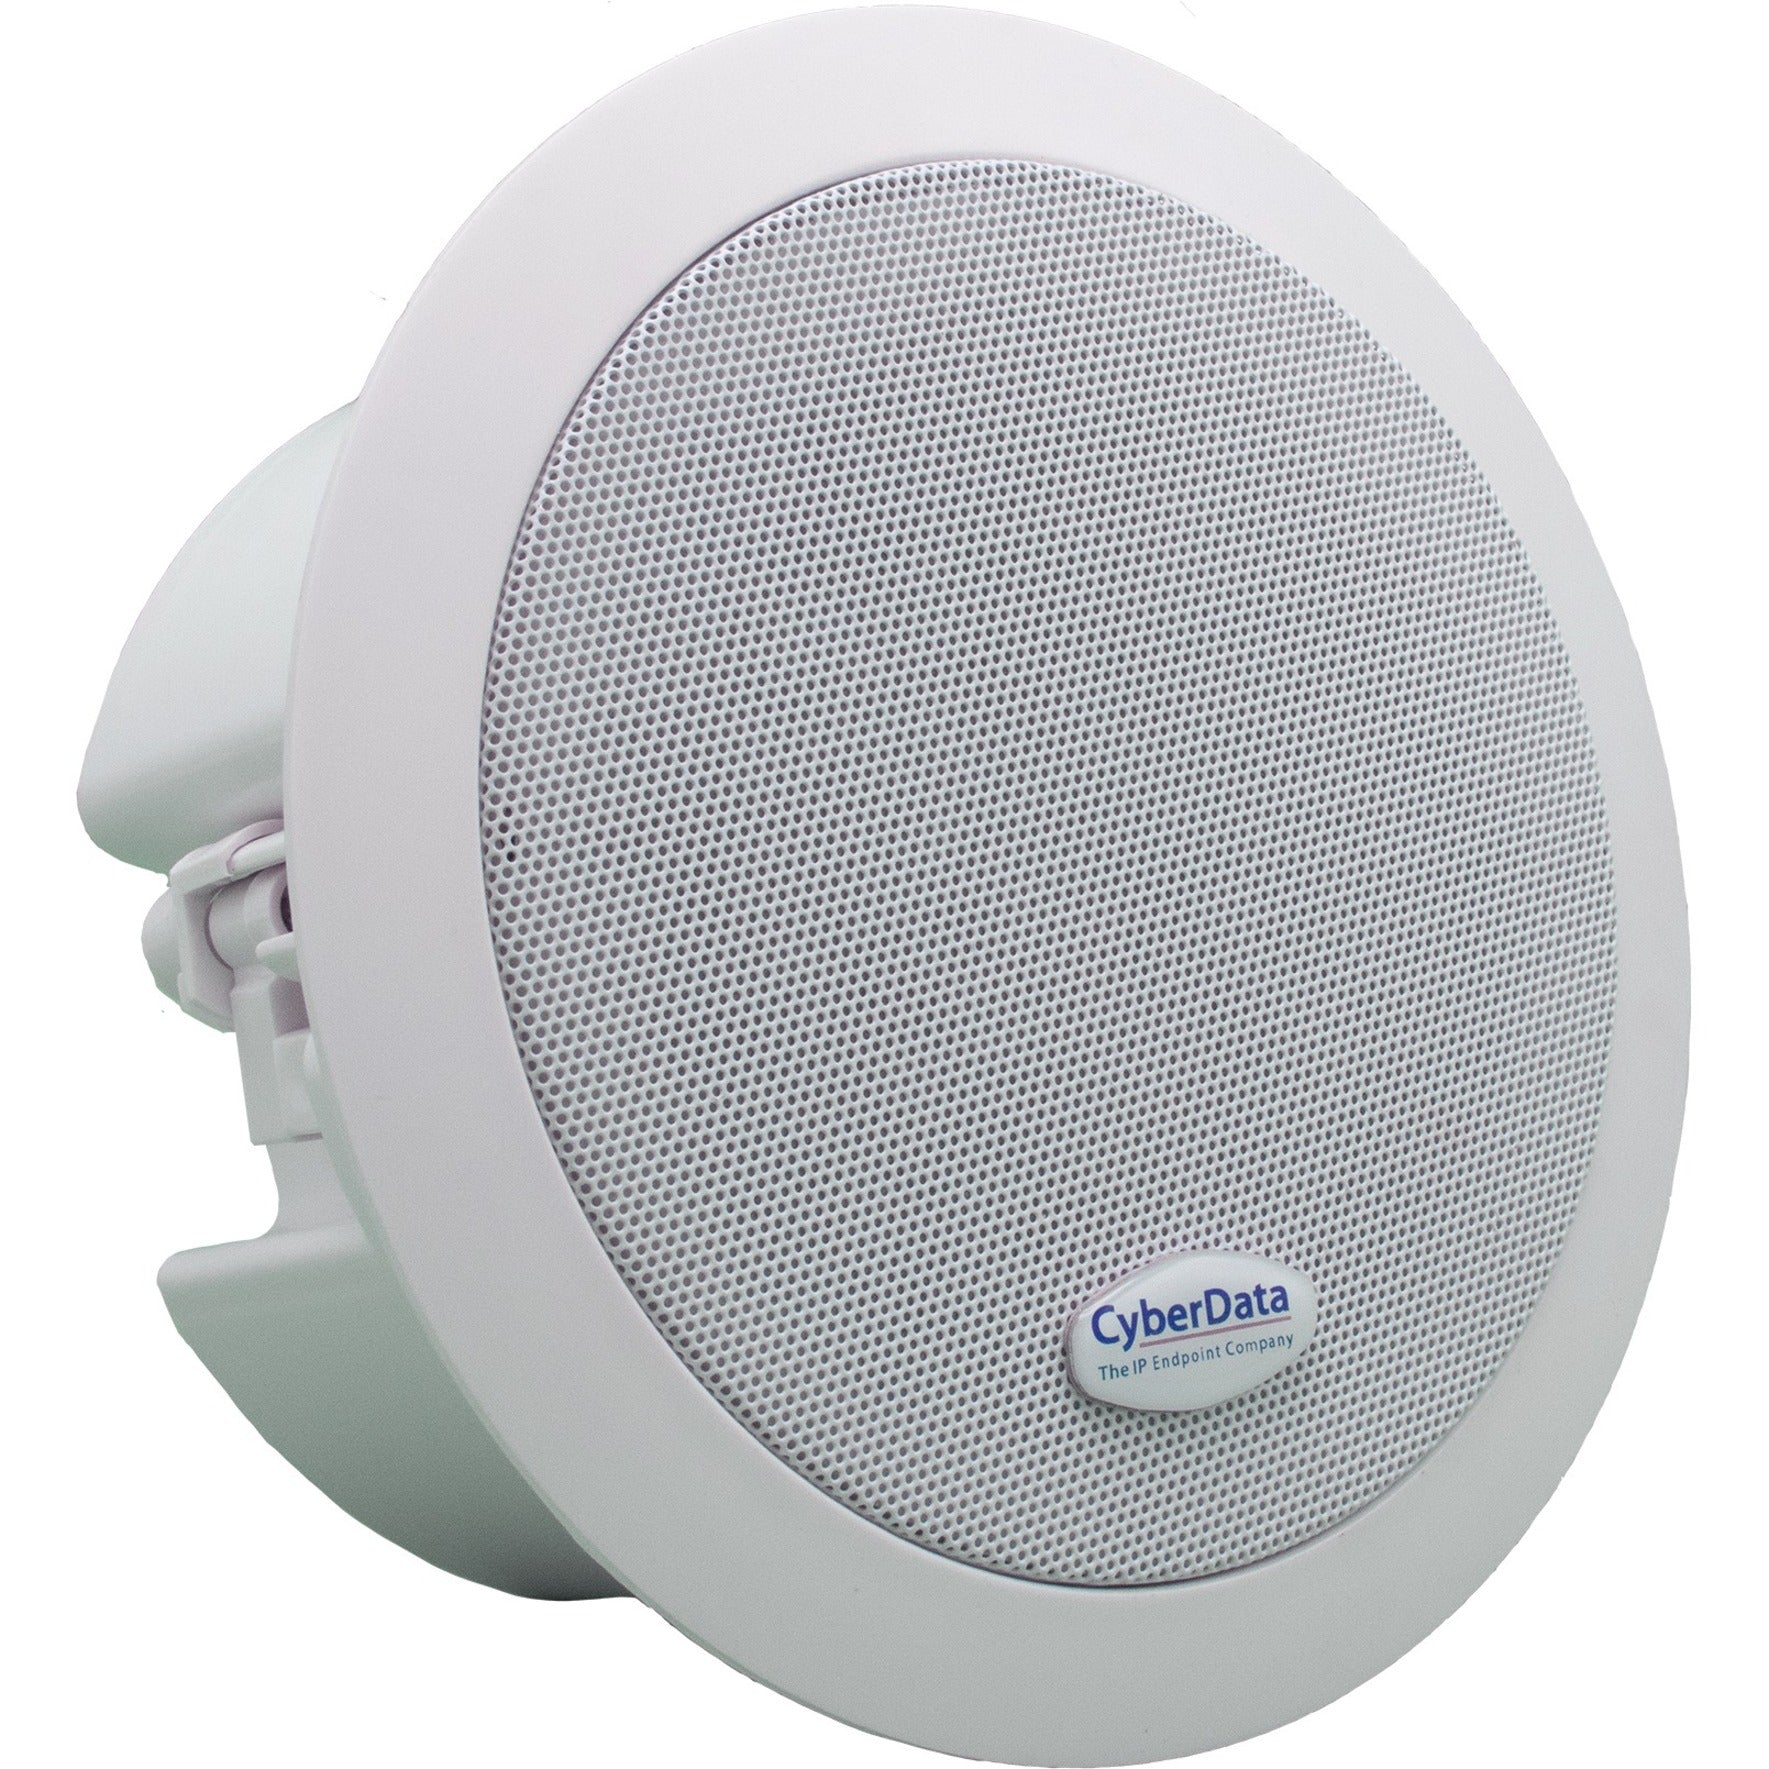 CyberData 011504 InformaCast Enabled Ceiling Speaker, 2 Year Warranty, United States, RoHS Certified